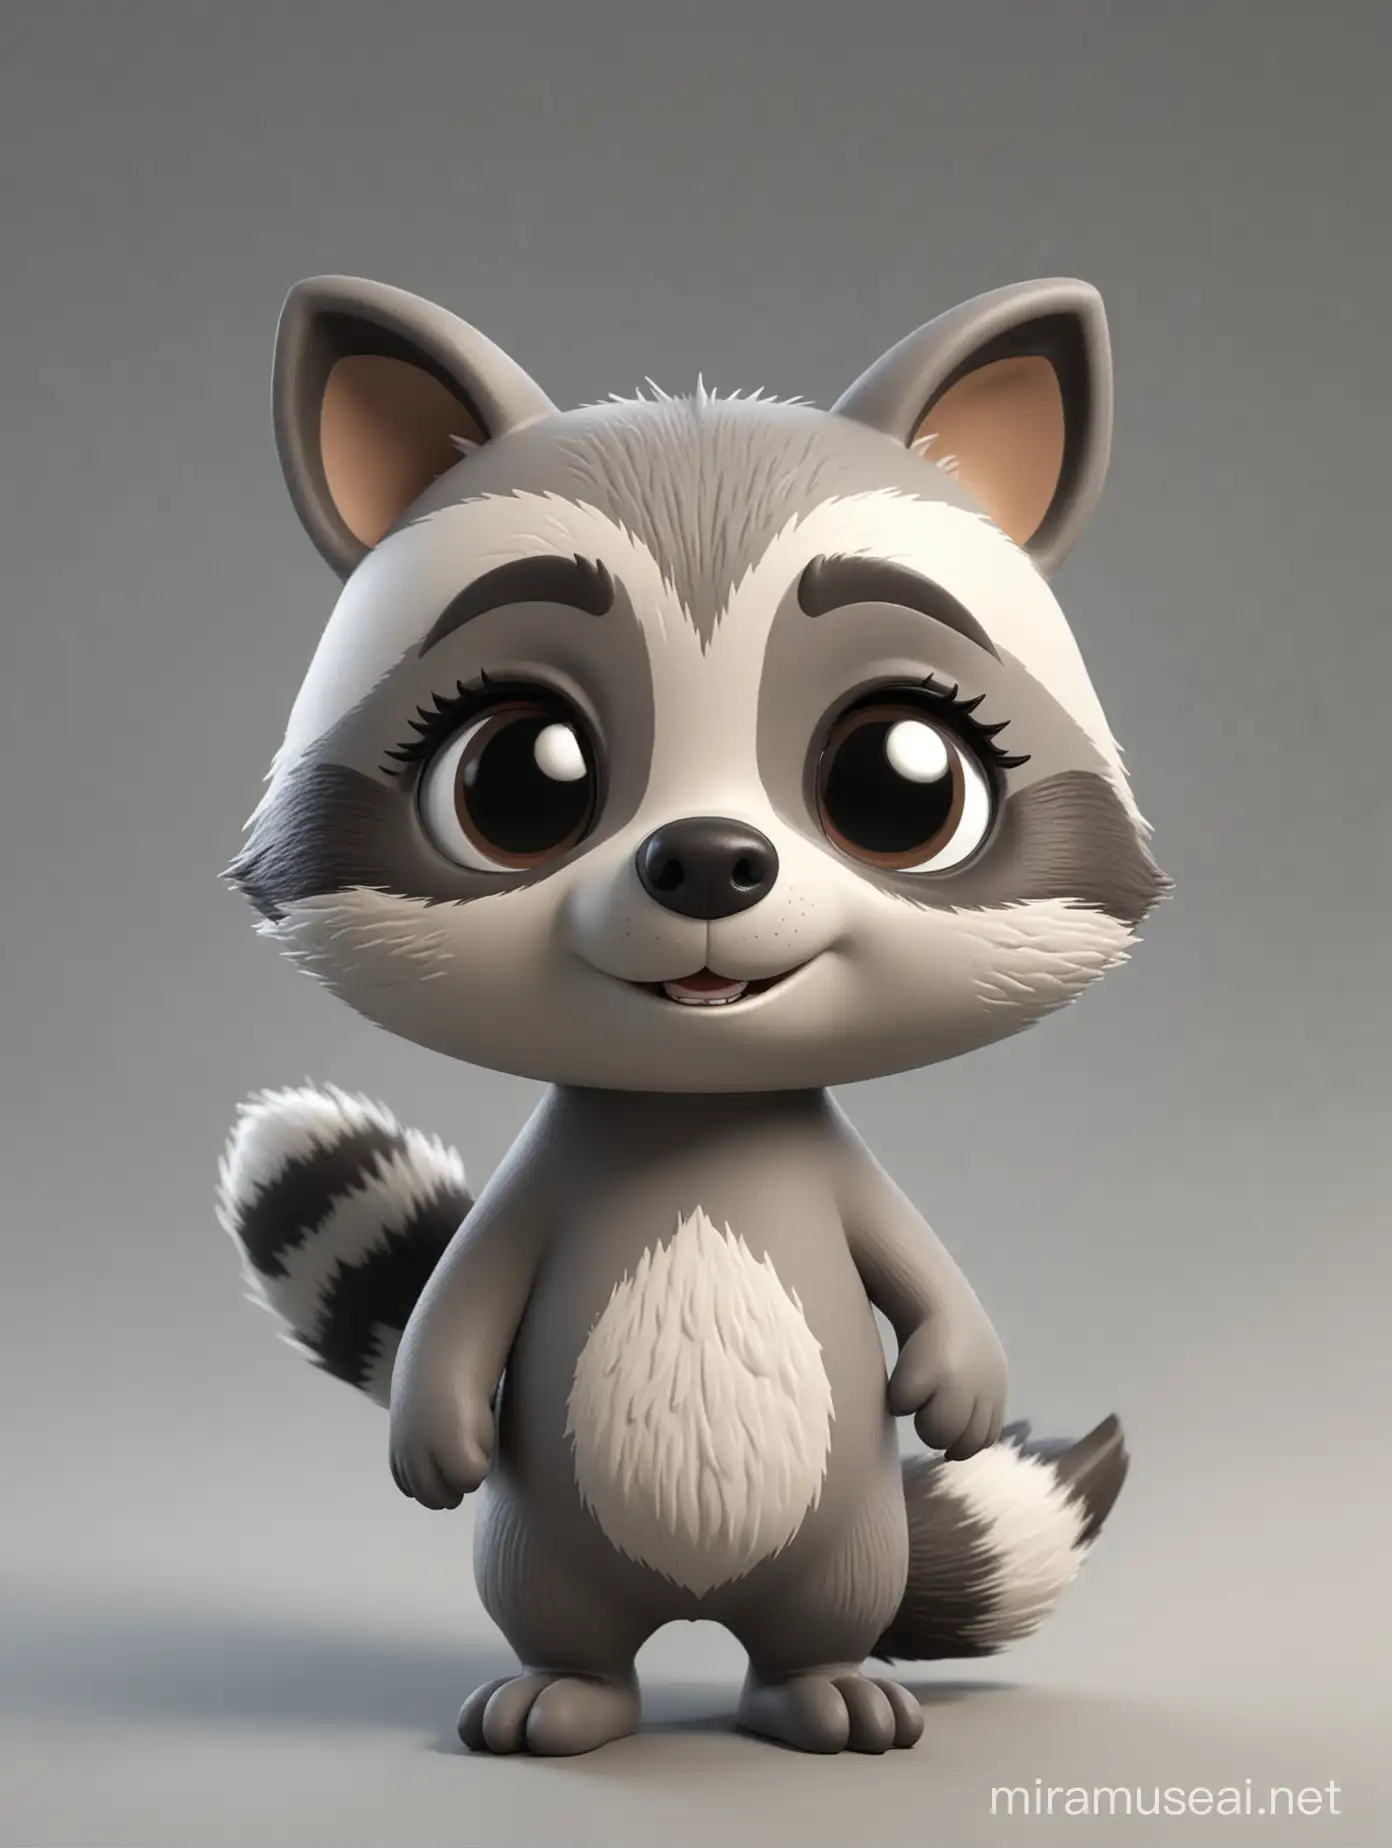 3D chibi racoon, simple and plain shapes, clay cartoon style, gray colors, high resolution